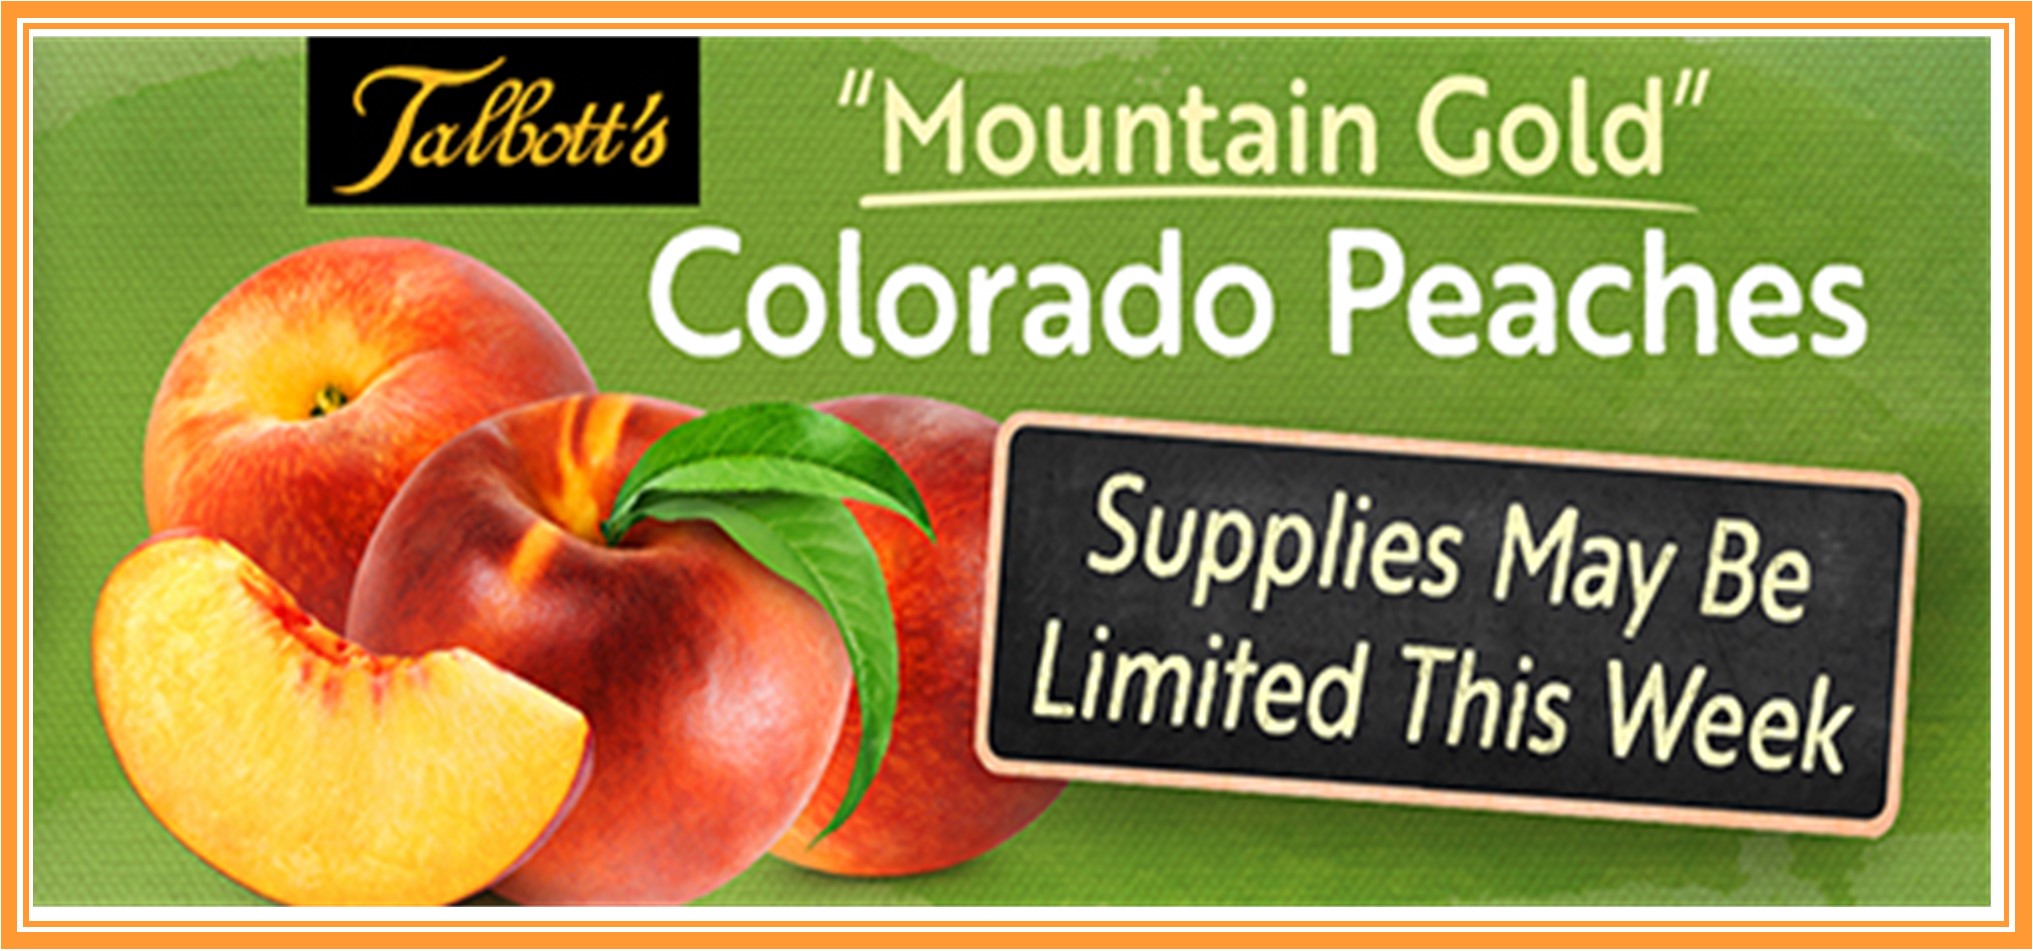 Colo Peaches Limited Supply.jpg